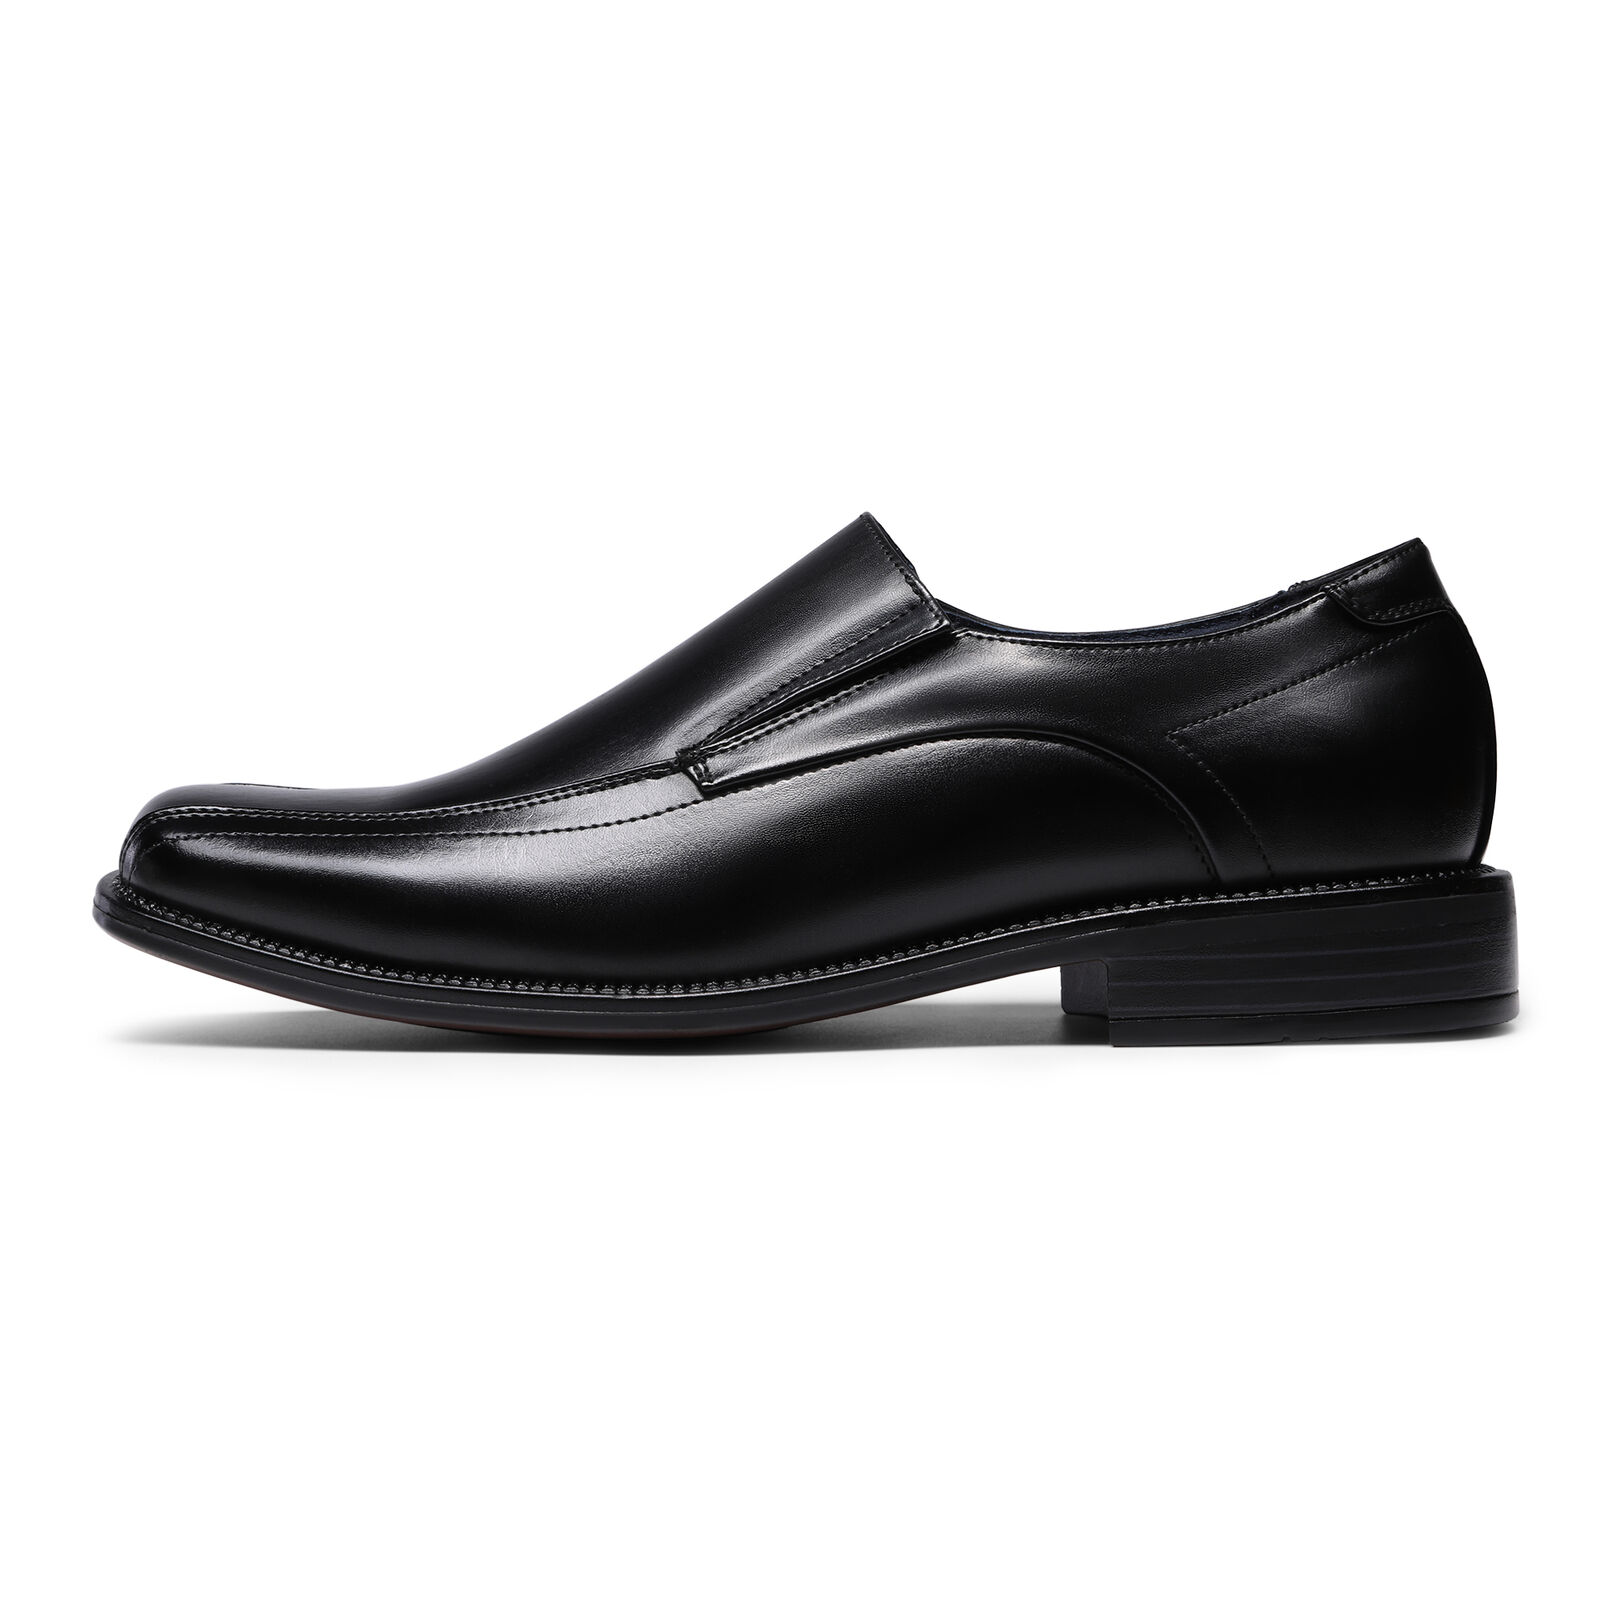 Men's Dress Loafer Shoes Slip On Square Toe Driving Casual Shoes